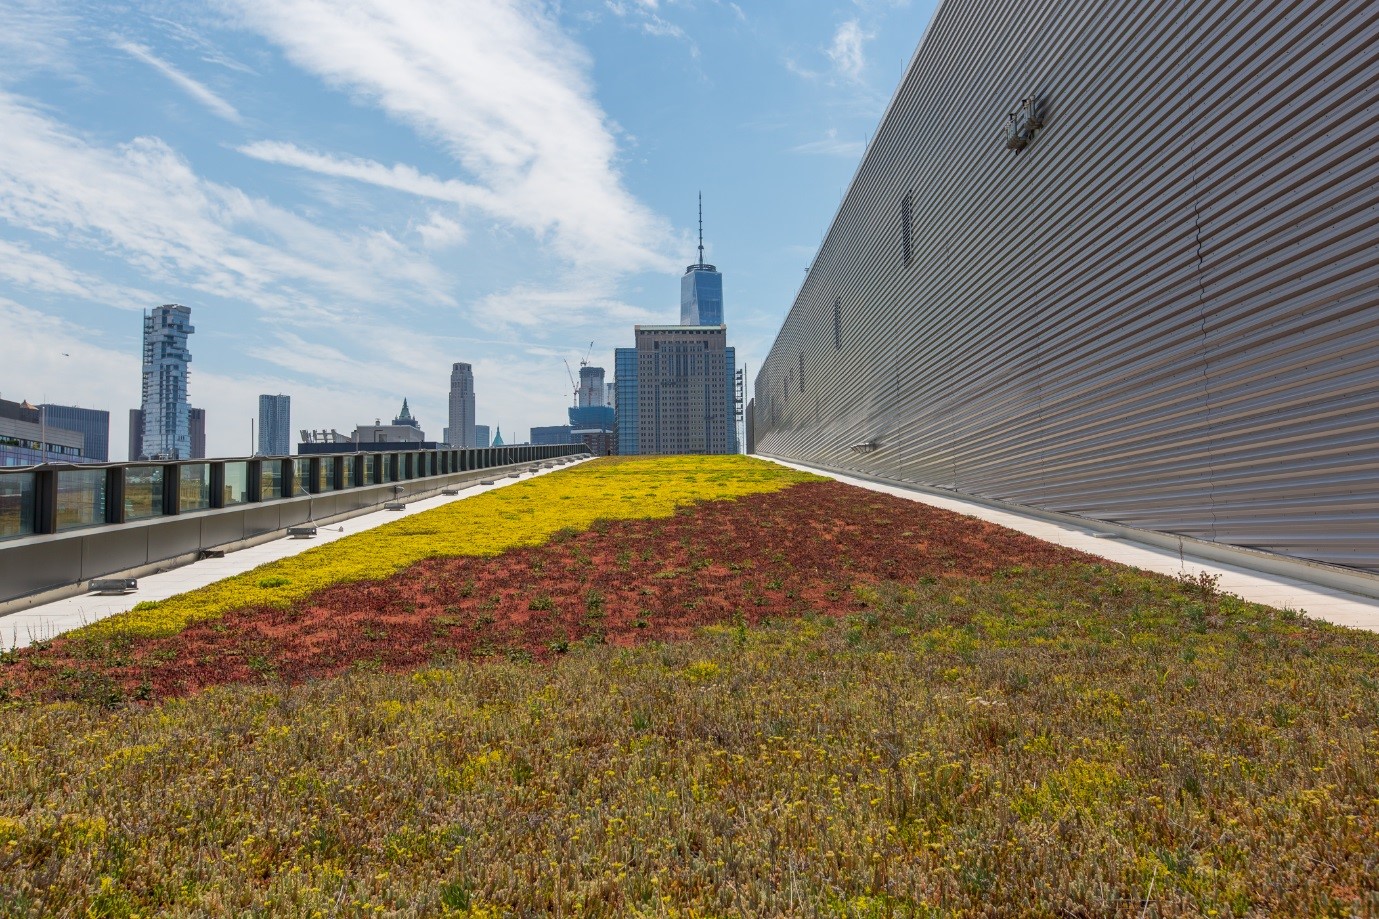 The green roof at the M 1/2/5 Sanitation Garage